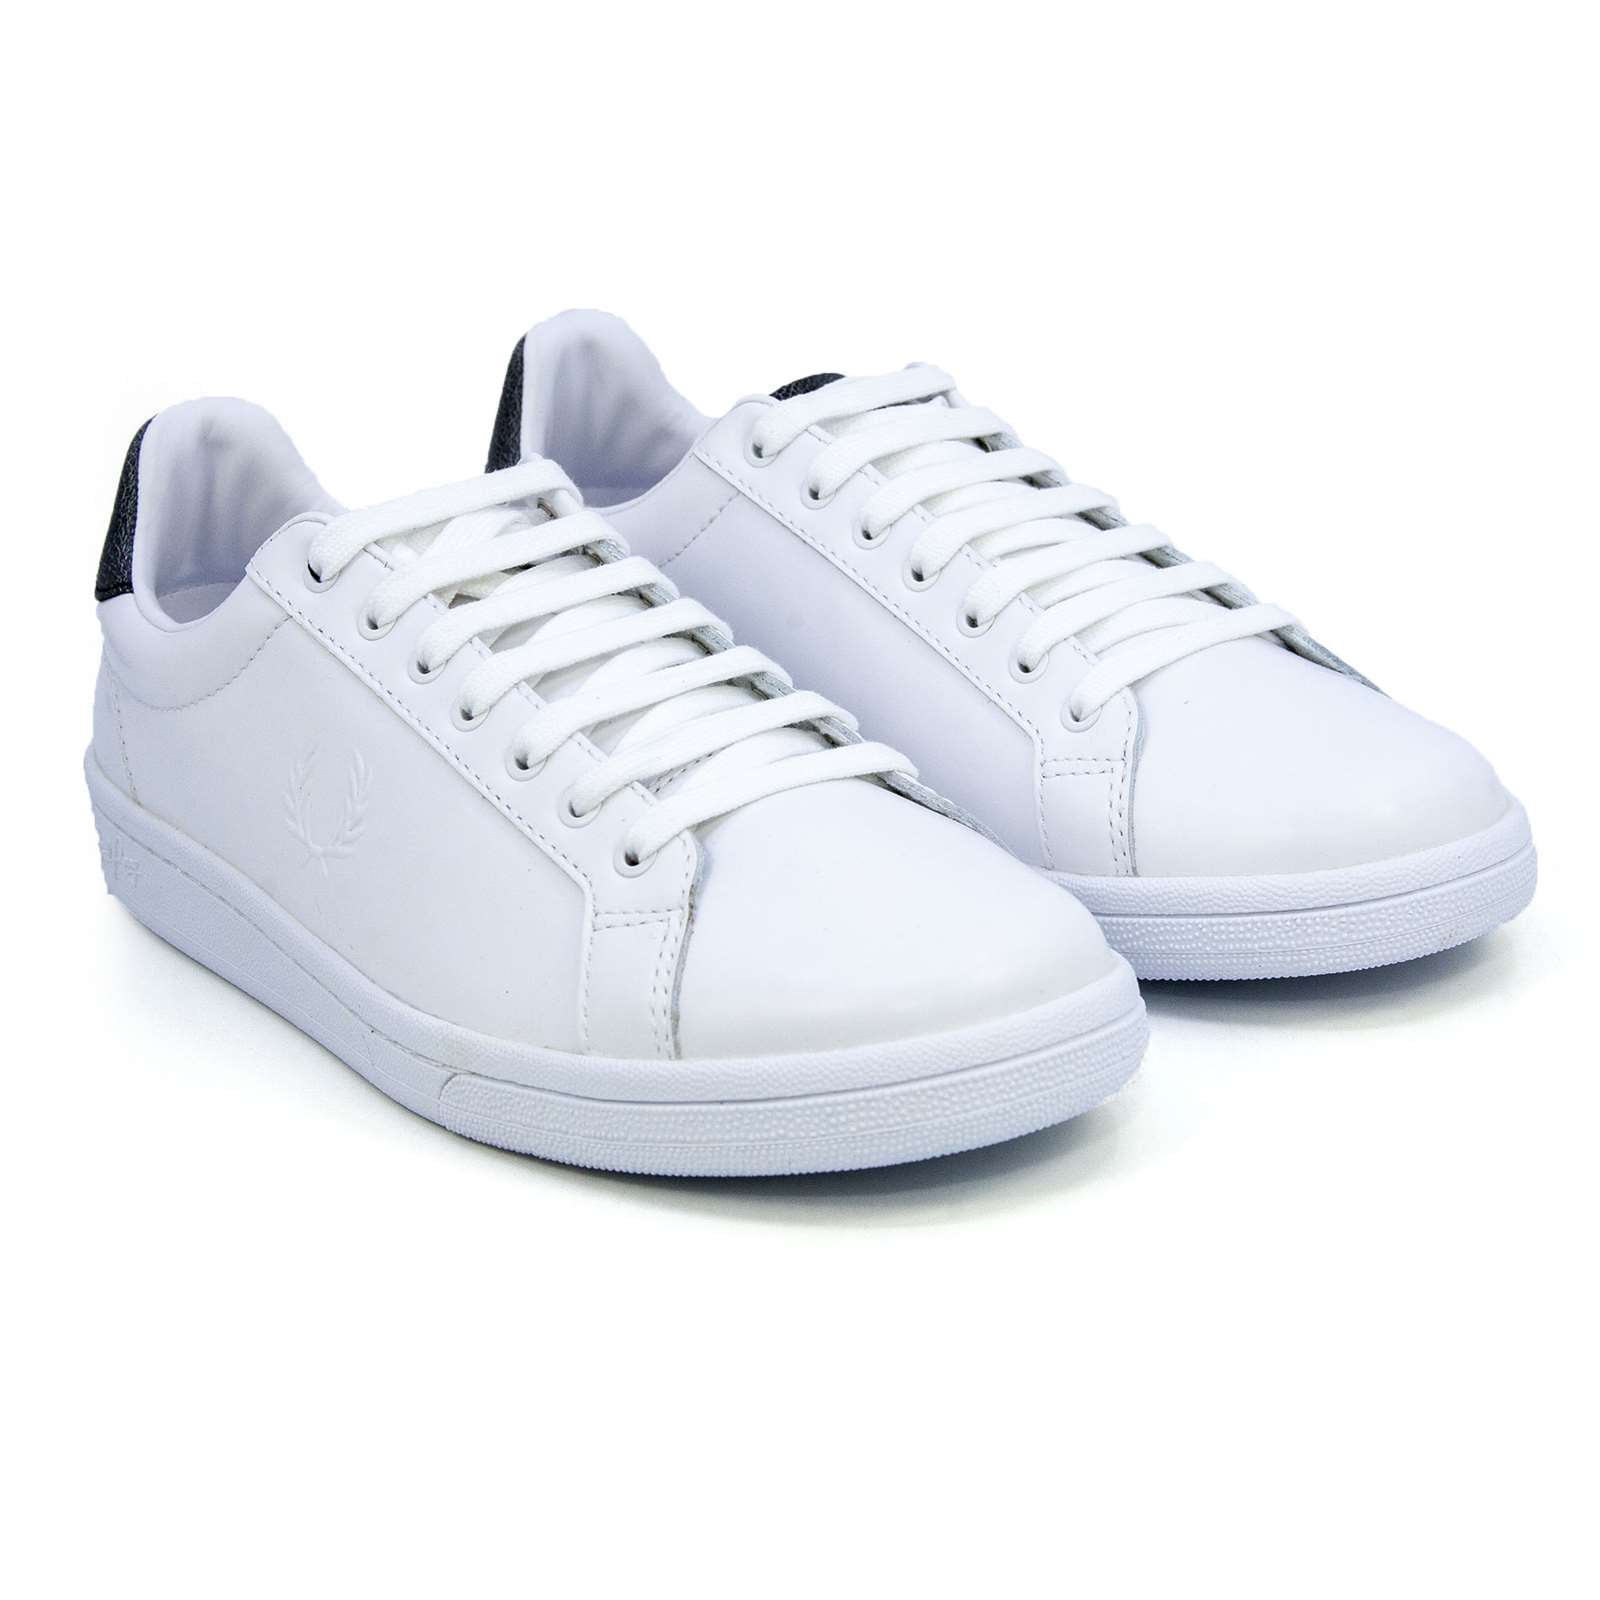 Fred Perry Men's B721 Premium Leather Sneakers, White,7 M US Walmart.com